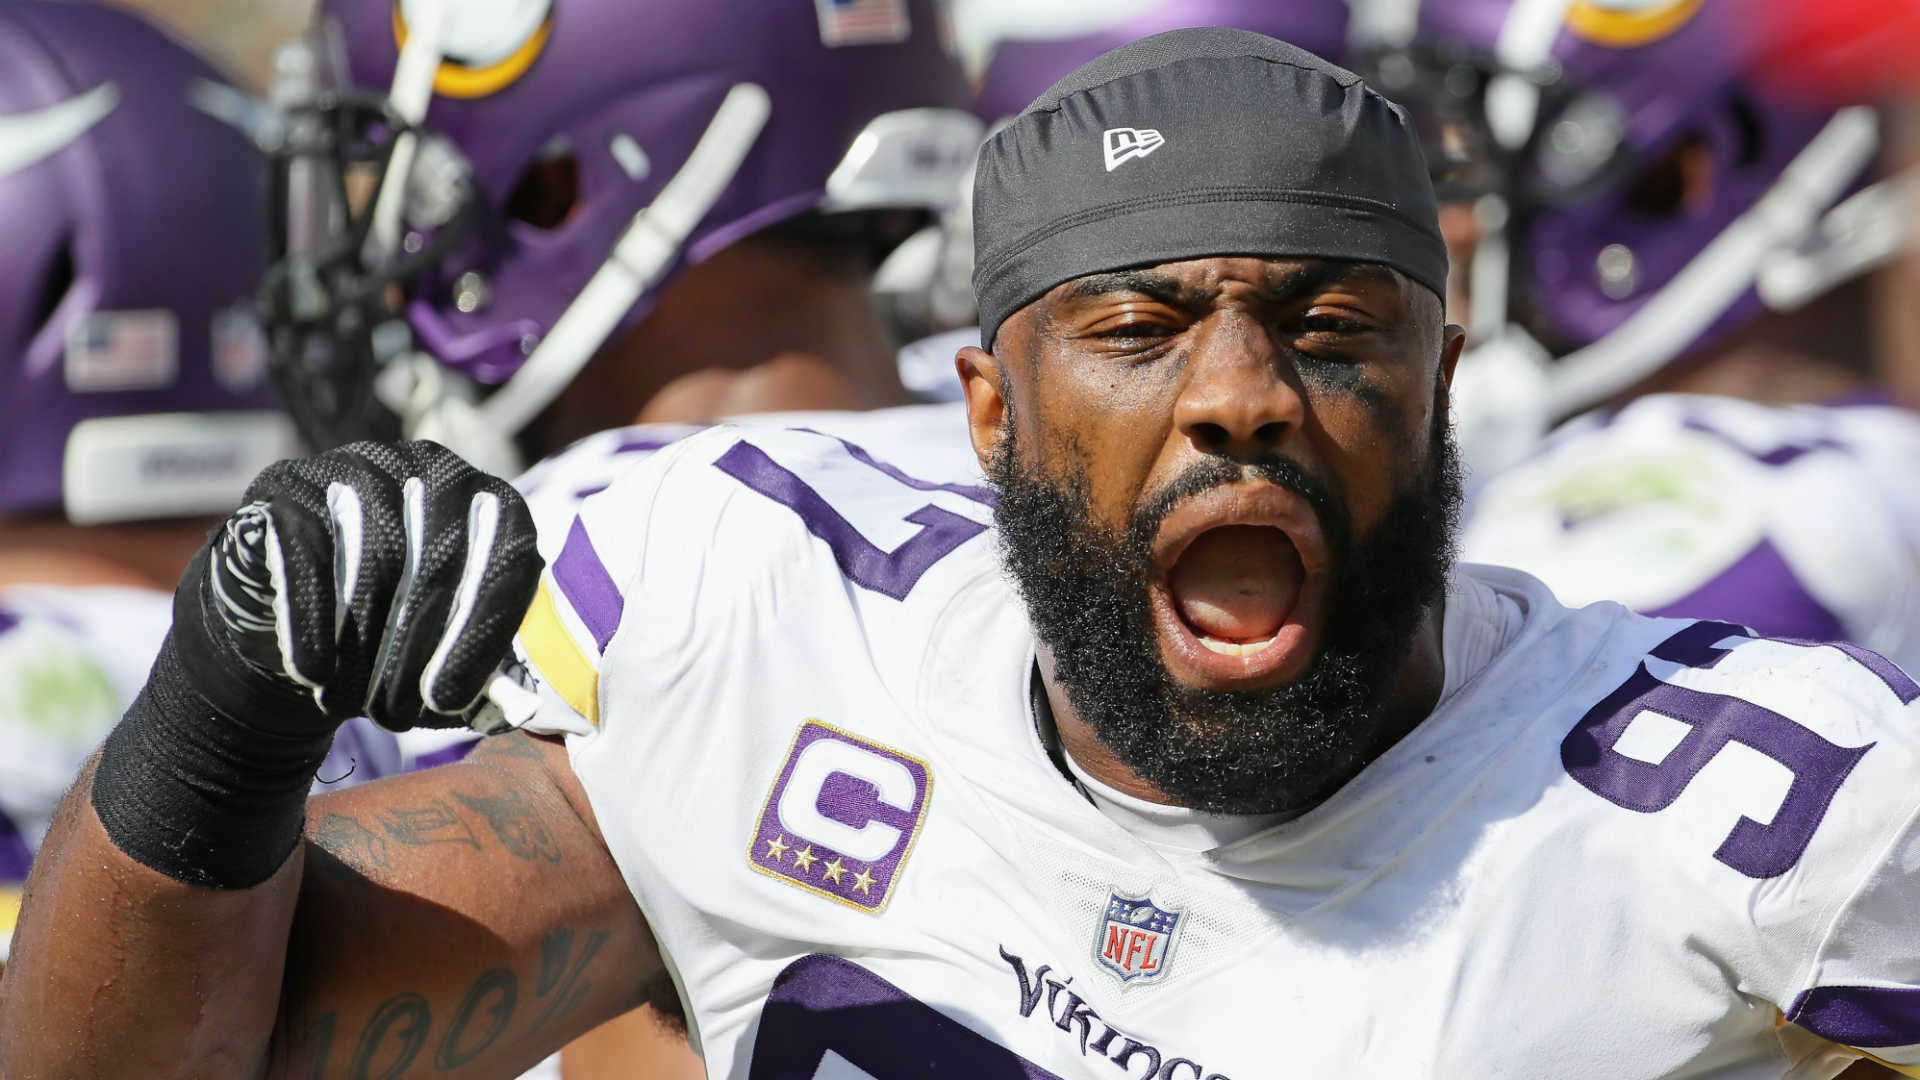 Vikings' Everson Griffen Accused of Threatening to 'Shoot Up' Minneapolis Hotel